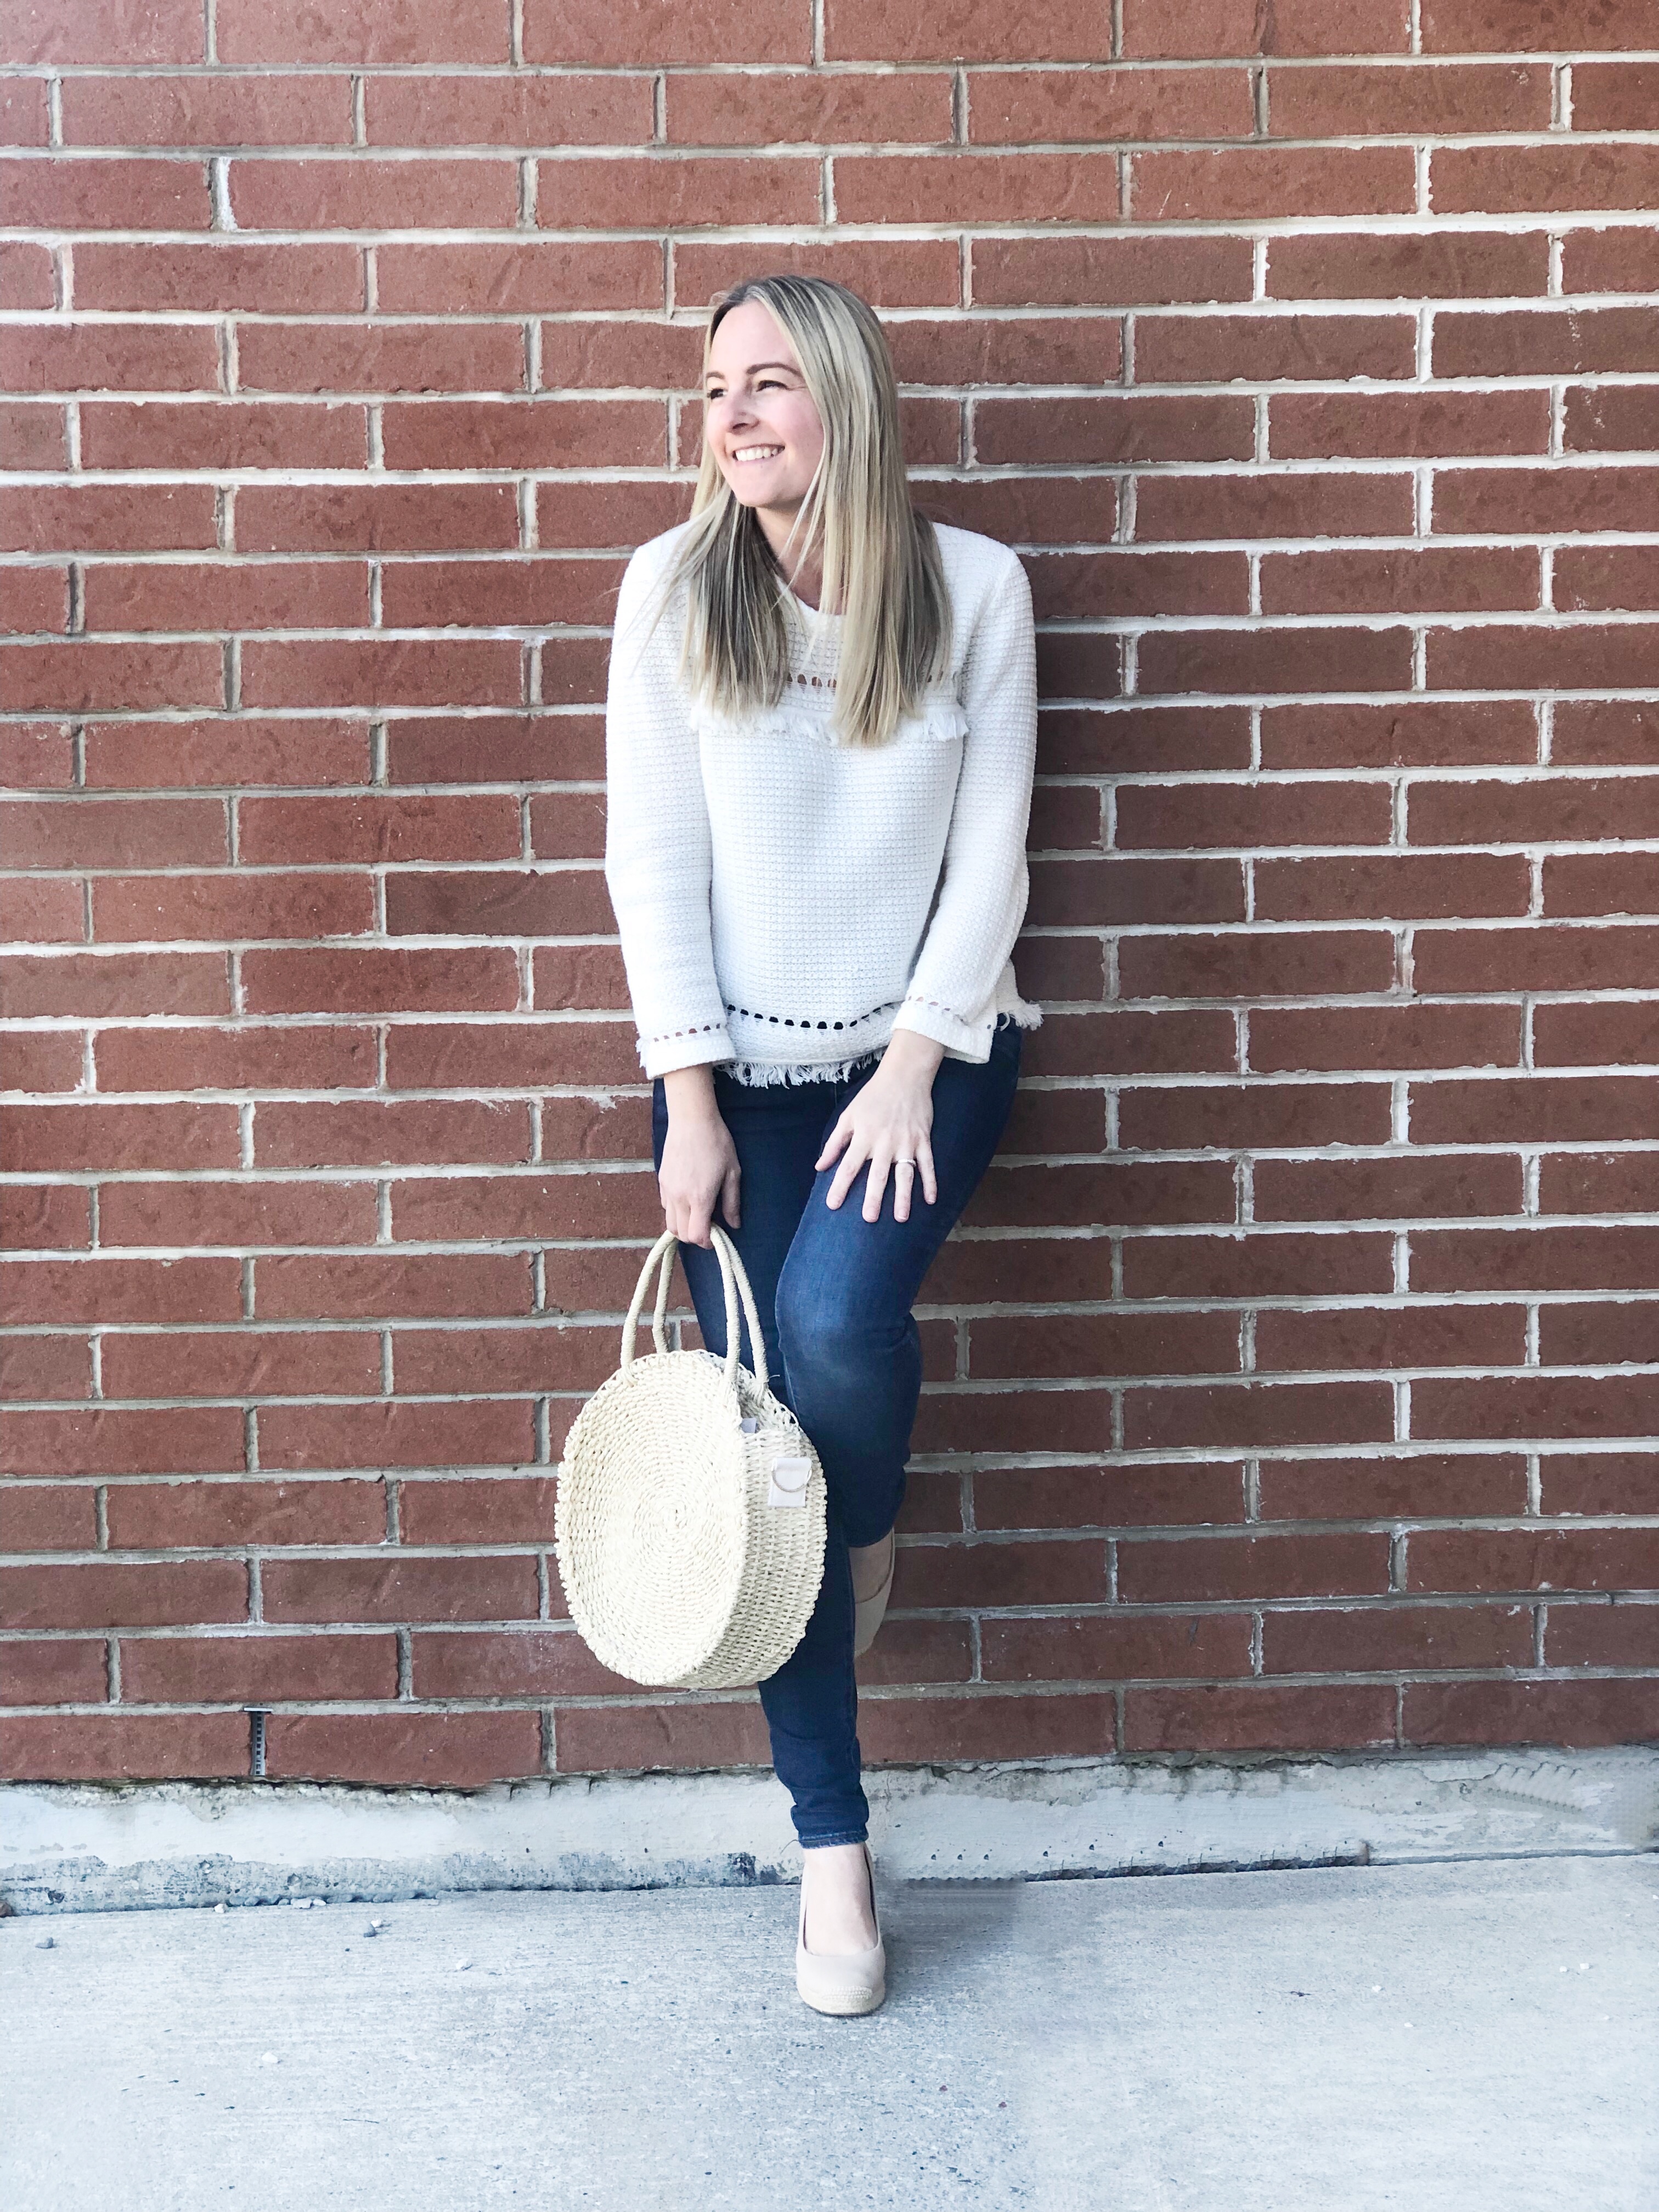 J Crew fringe sweater- Spring look on livin' life with style